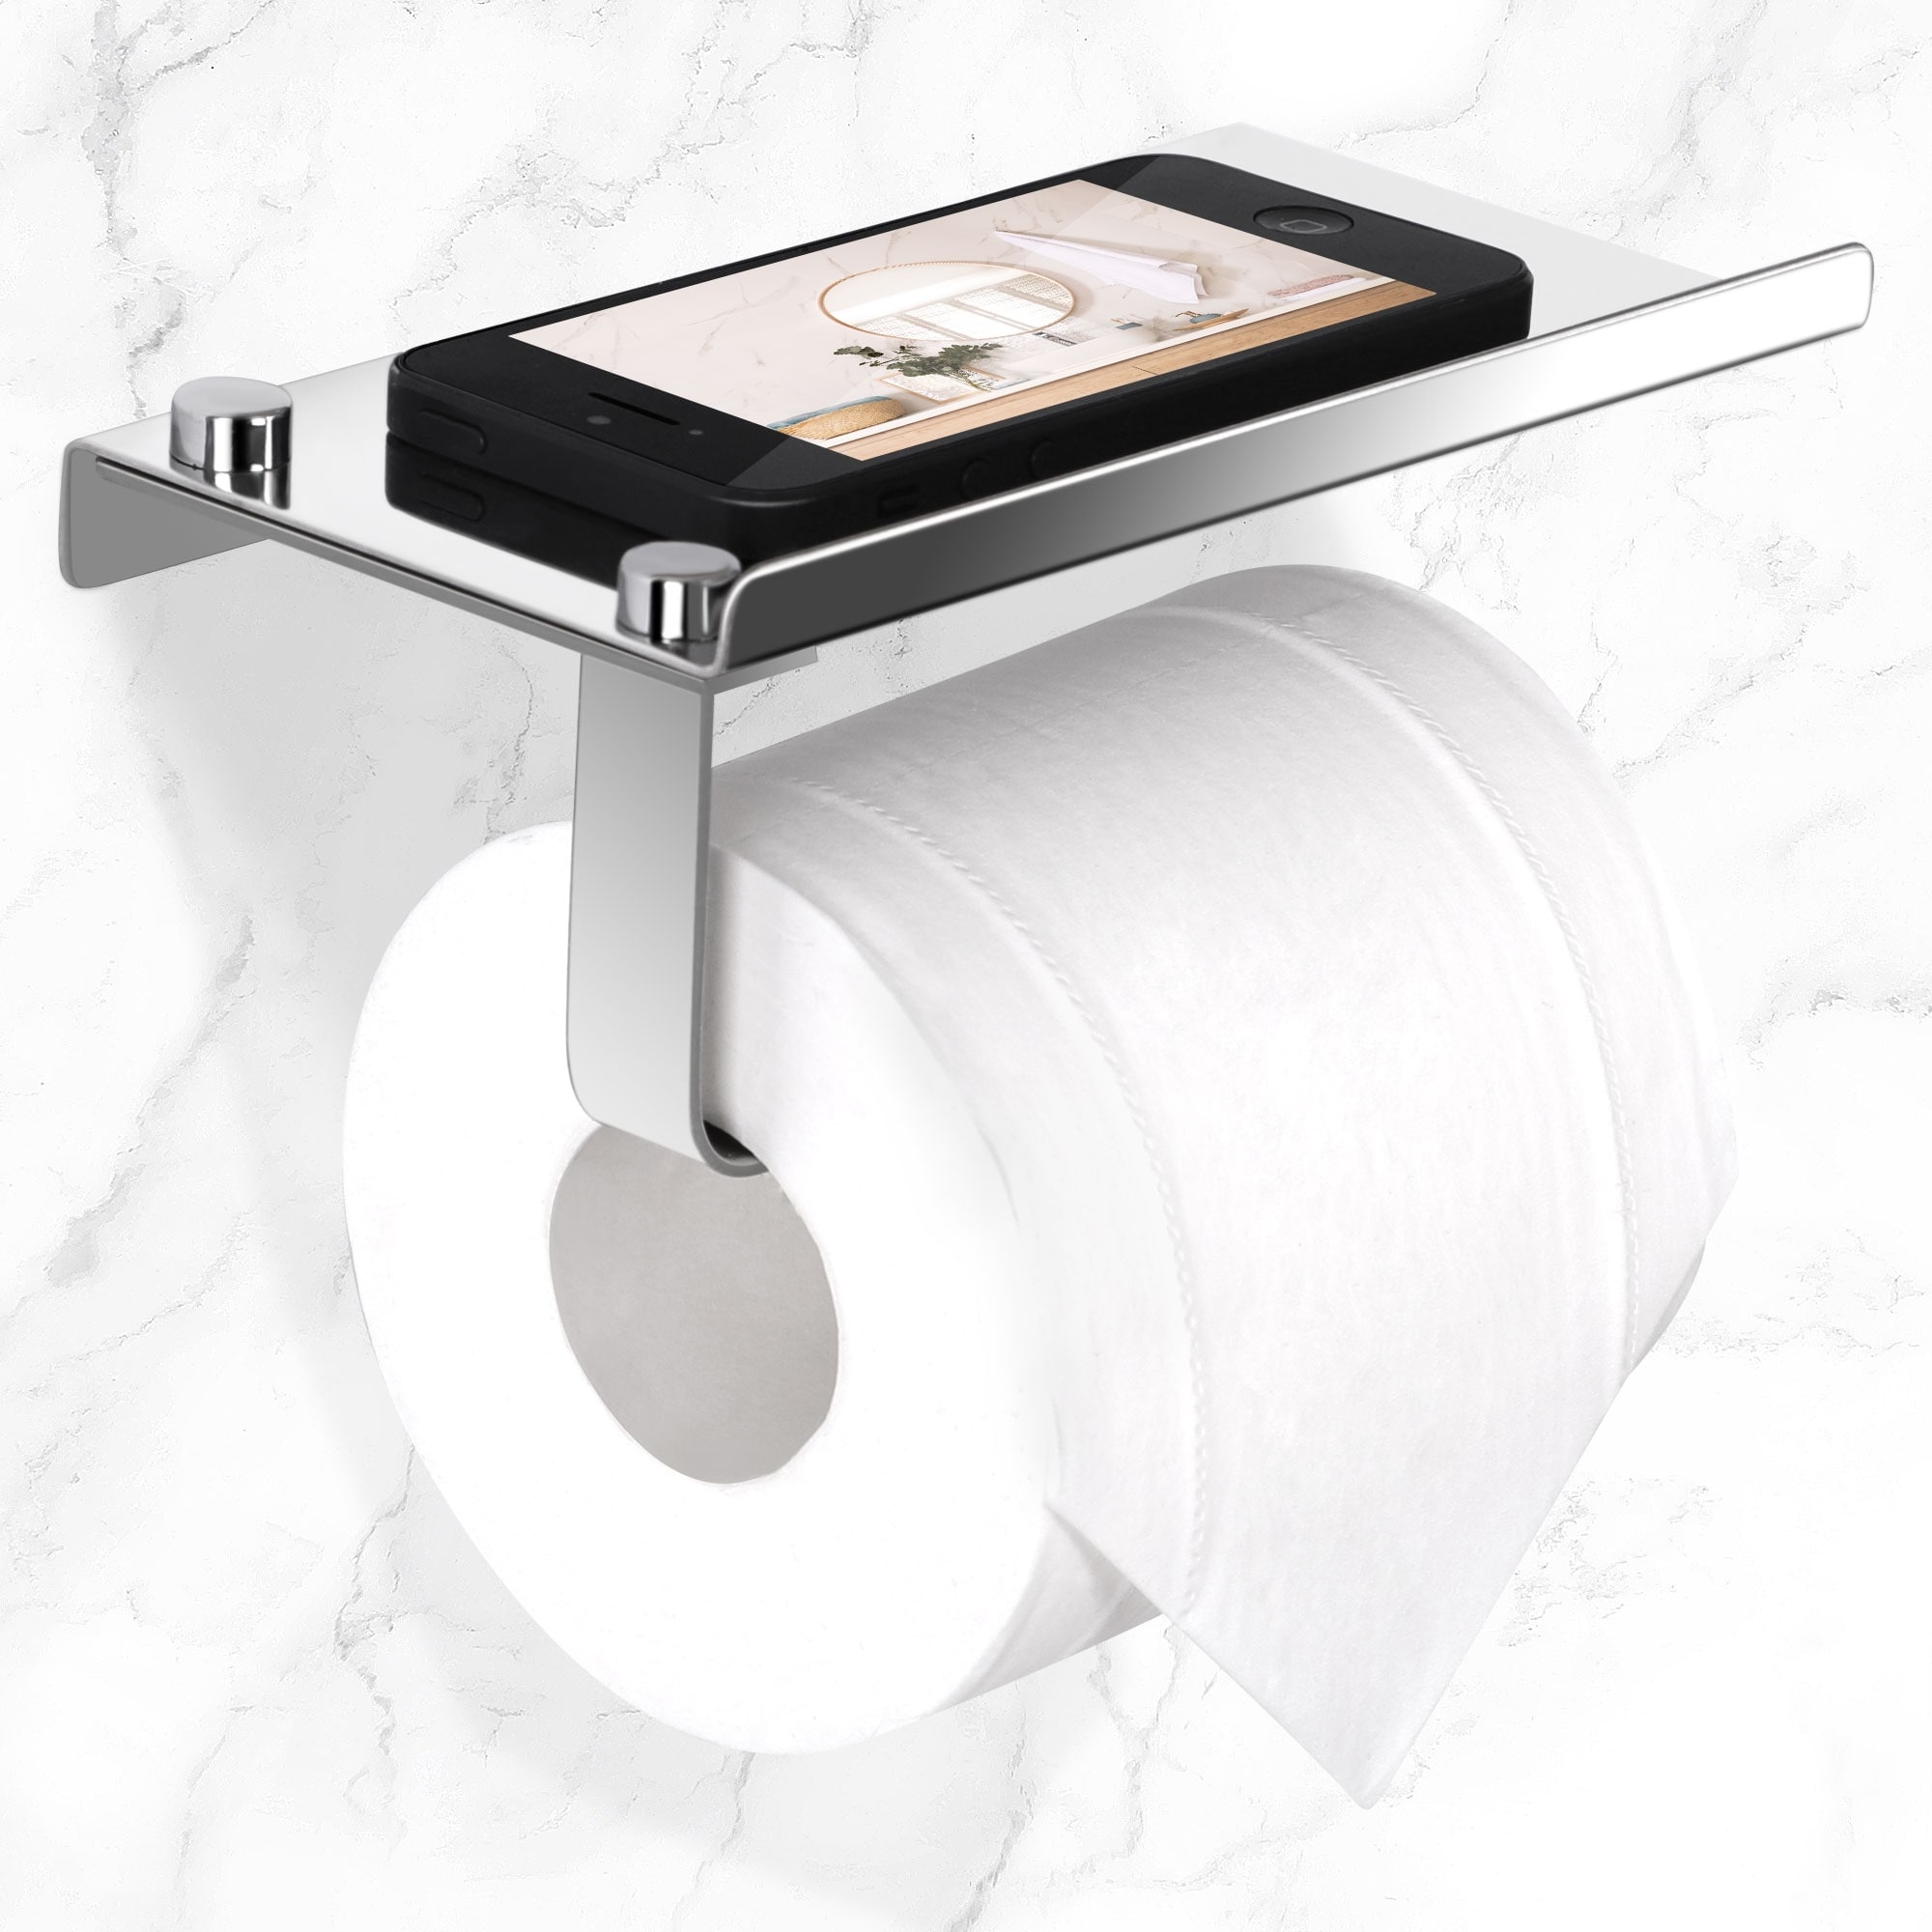 https://ak1.ostkcdn.com/images/products/is/images/direct/e39fba1b4fb91013280d51823280260689a5dbc8/Toilet-Paper-Holder-with-Phone-Shelf-Stainless-Steel-Roll-Holder-Polished-Silver.jpg